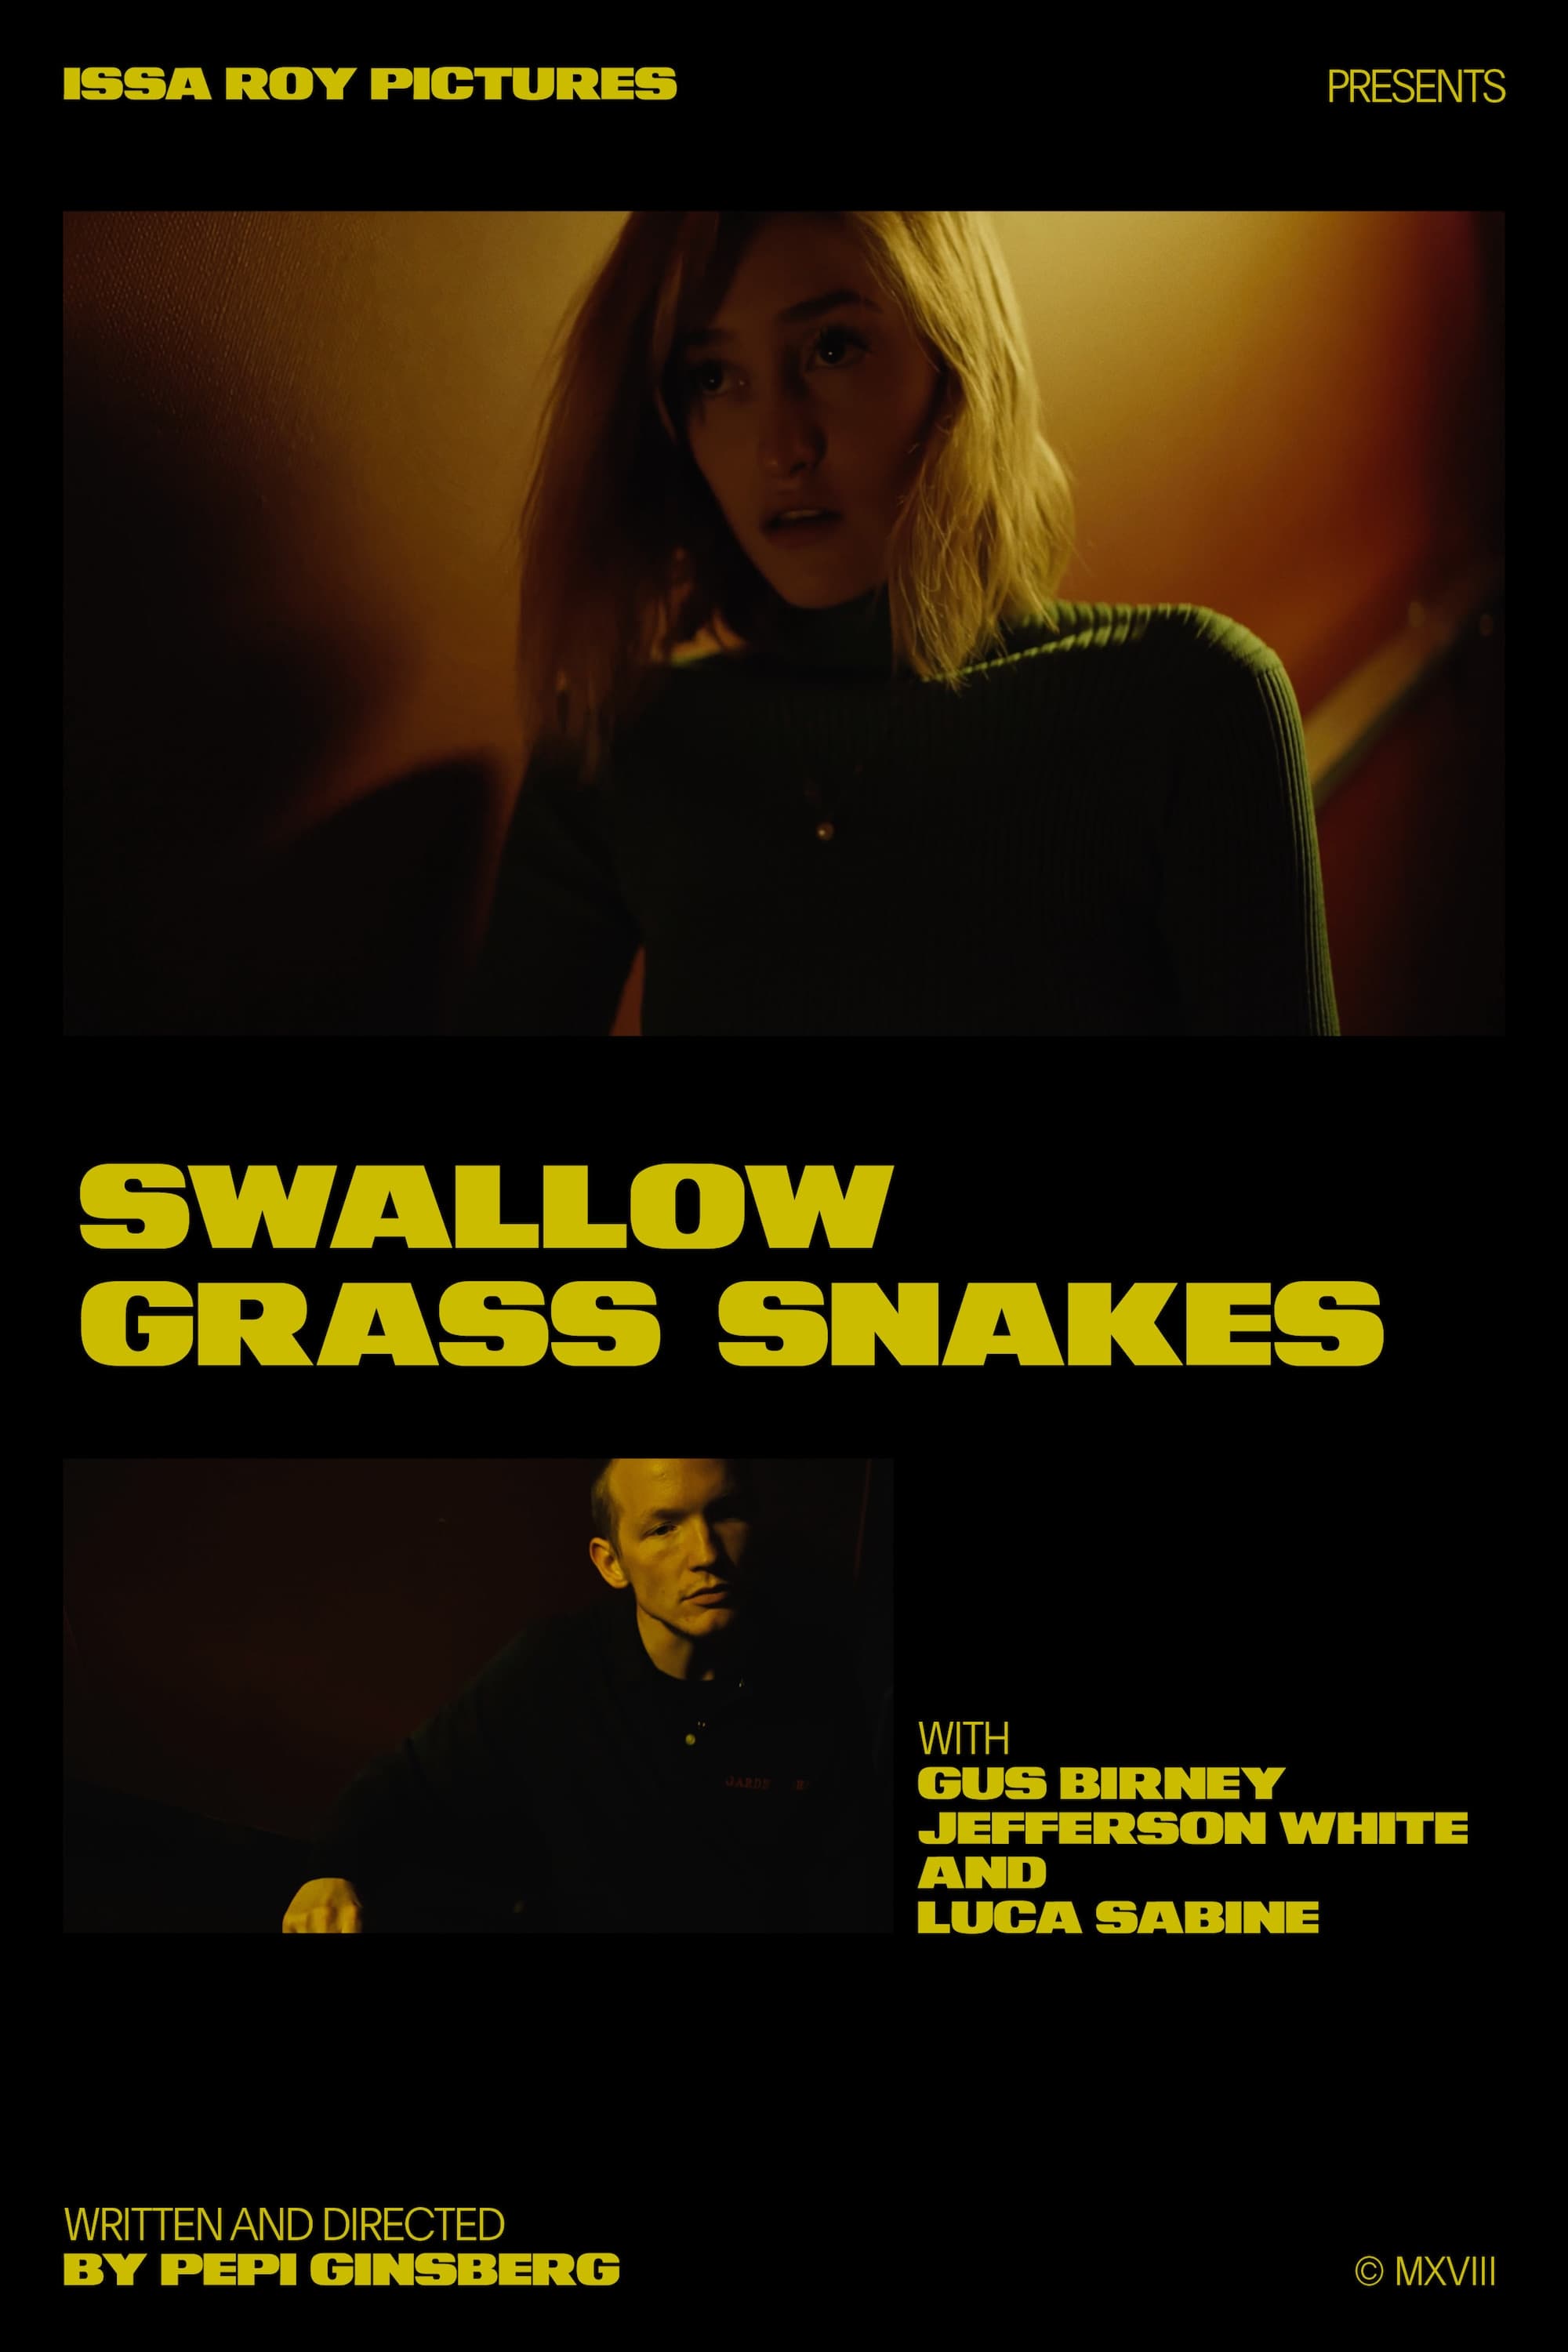 Swallow Grass Snakes